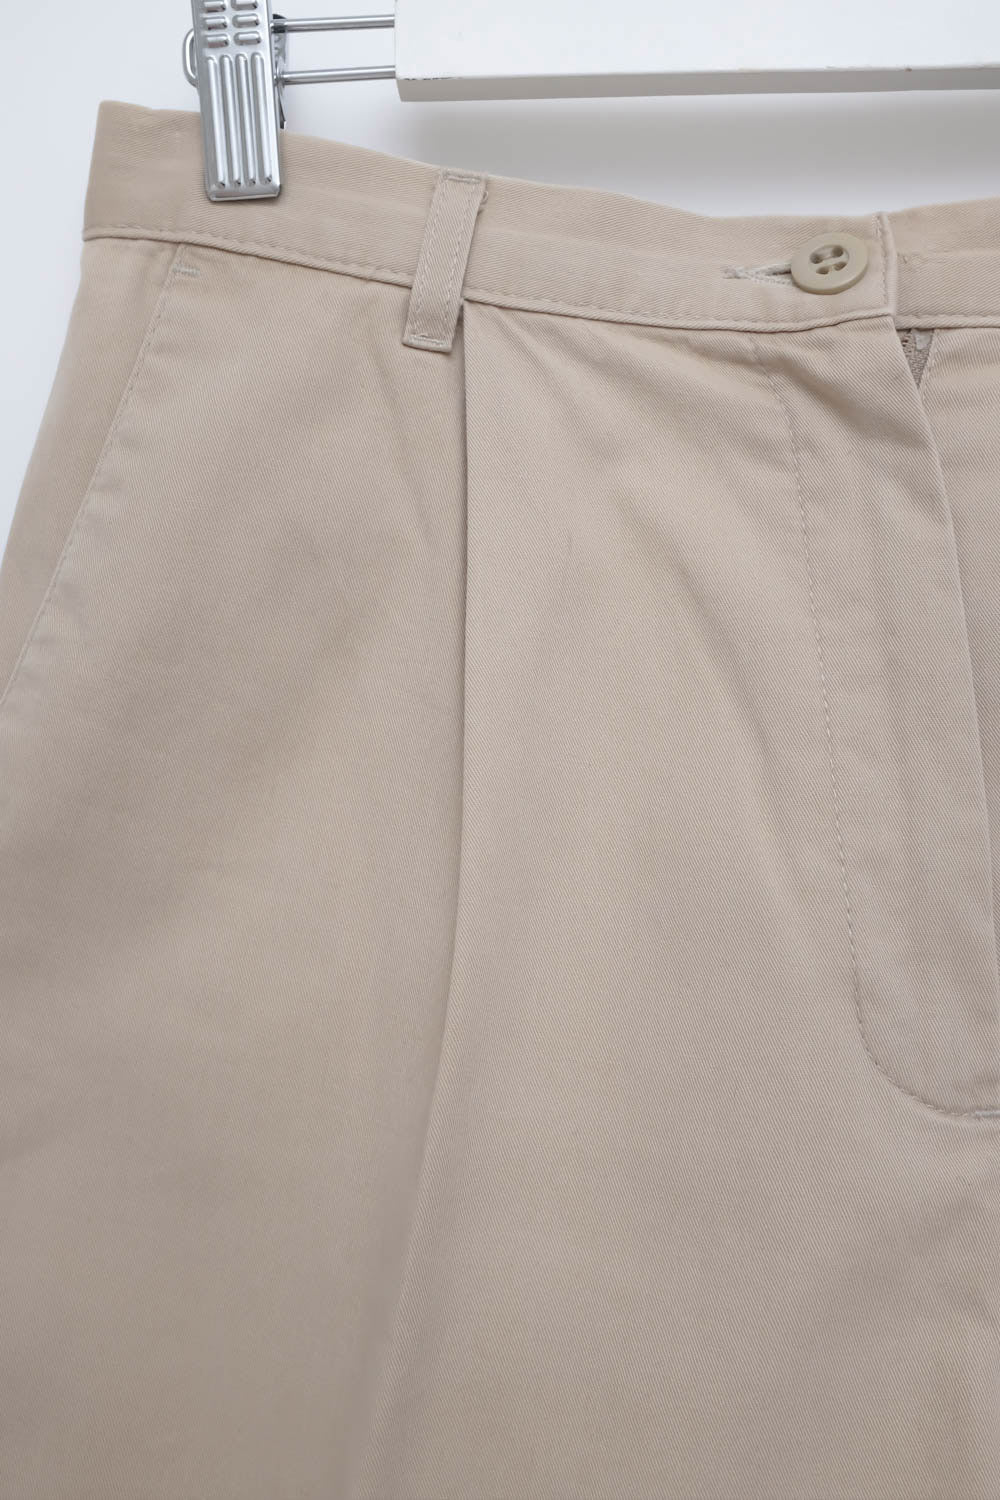 BEIGE PLEATED COTTON SHORTS